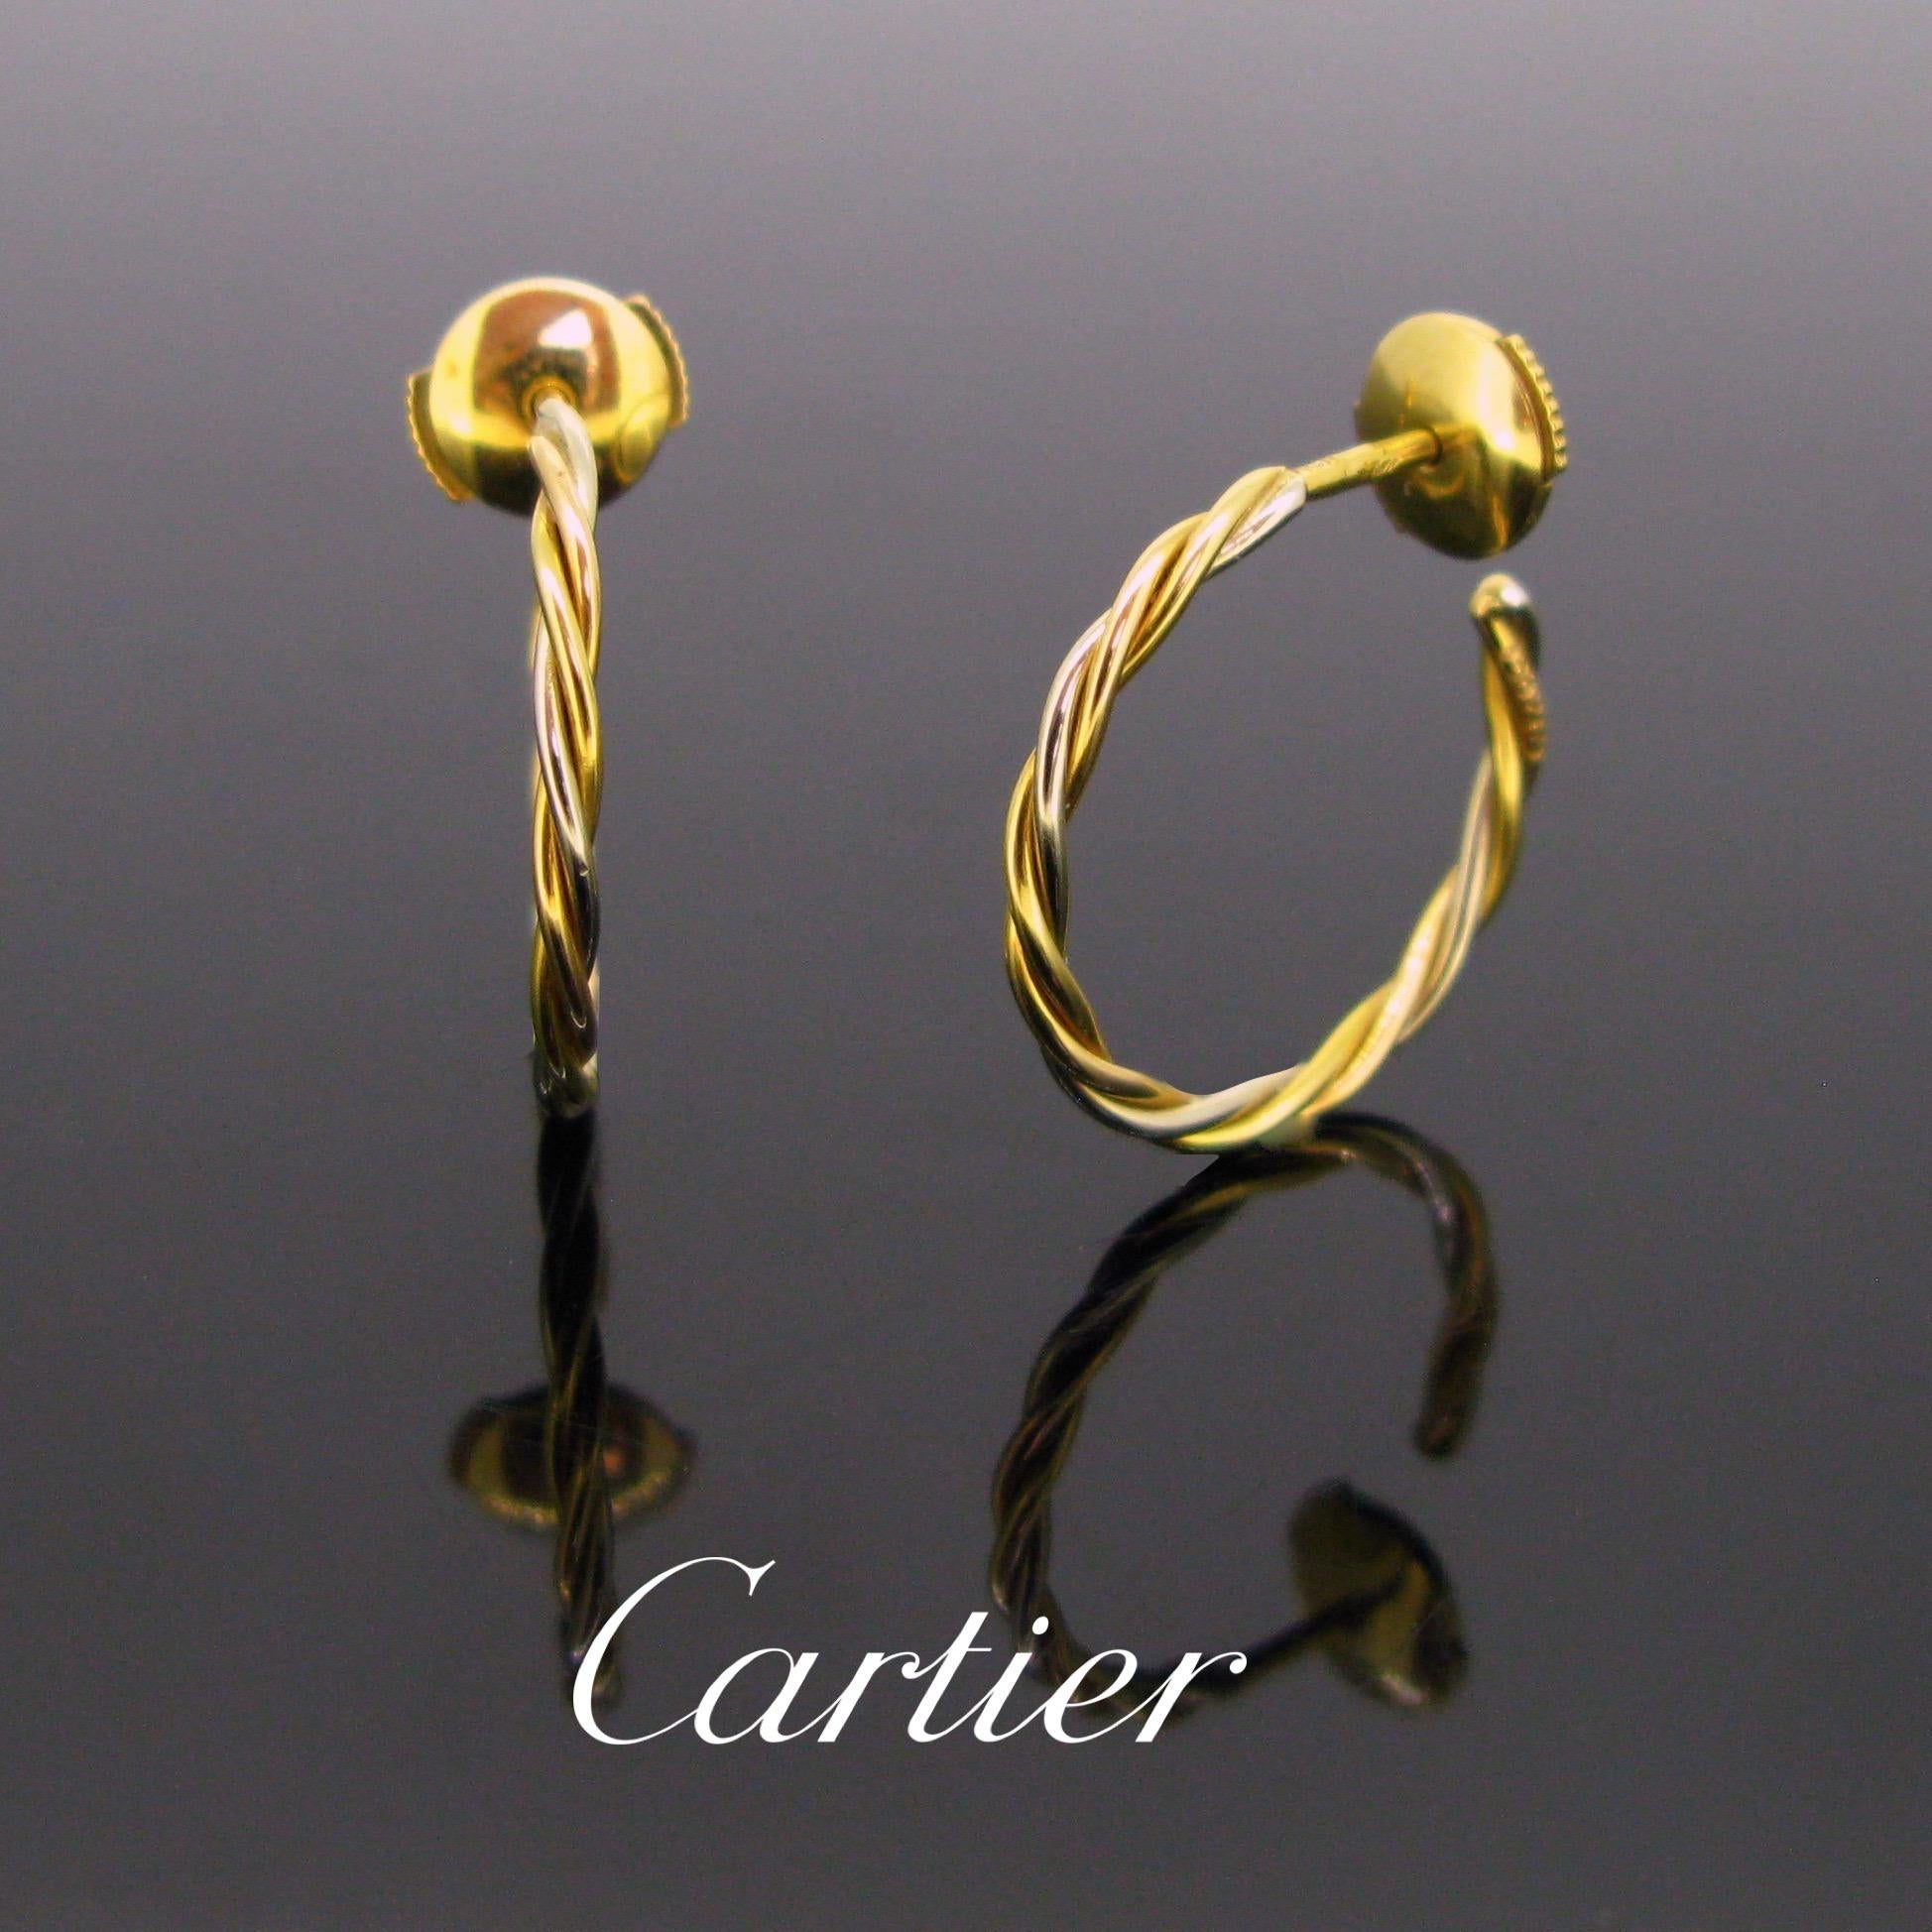 These hoop earrings are made in 18kt yellow and white gold. They are signed Cartier Paris and numbered 158265. These are very easy to wear for everyday. They are in very good condition. 

Circa: 1990

Weight: 3.8gr

Metal: 18kt white and yellow